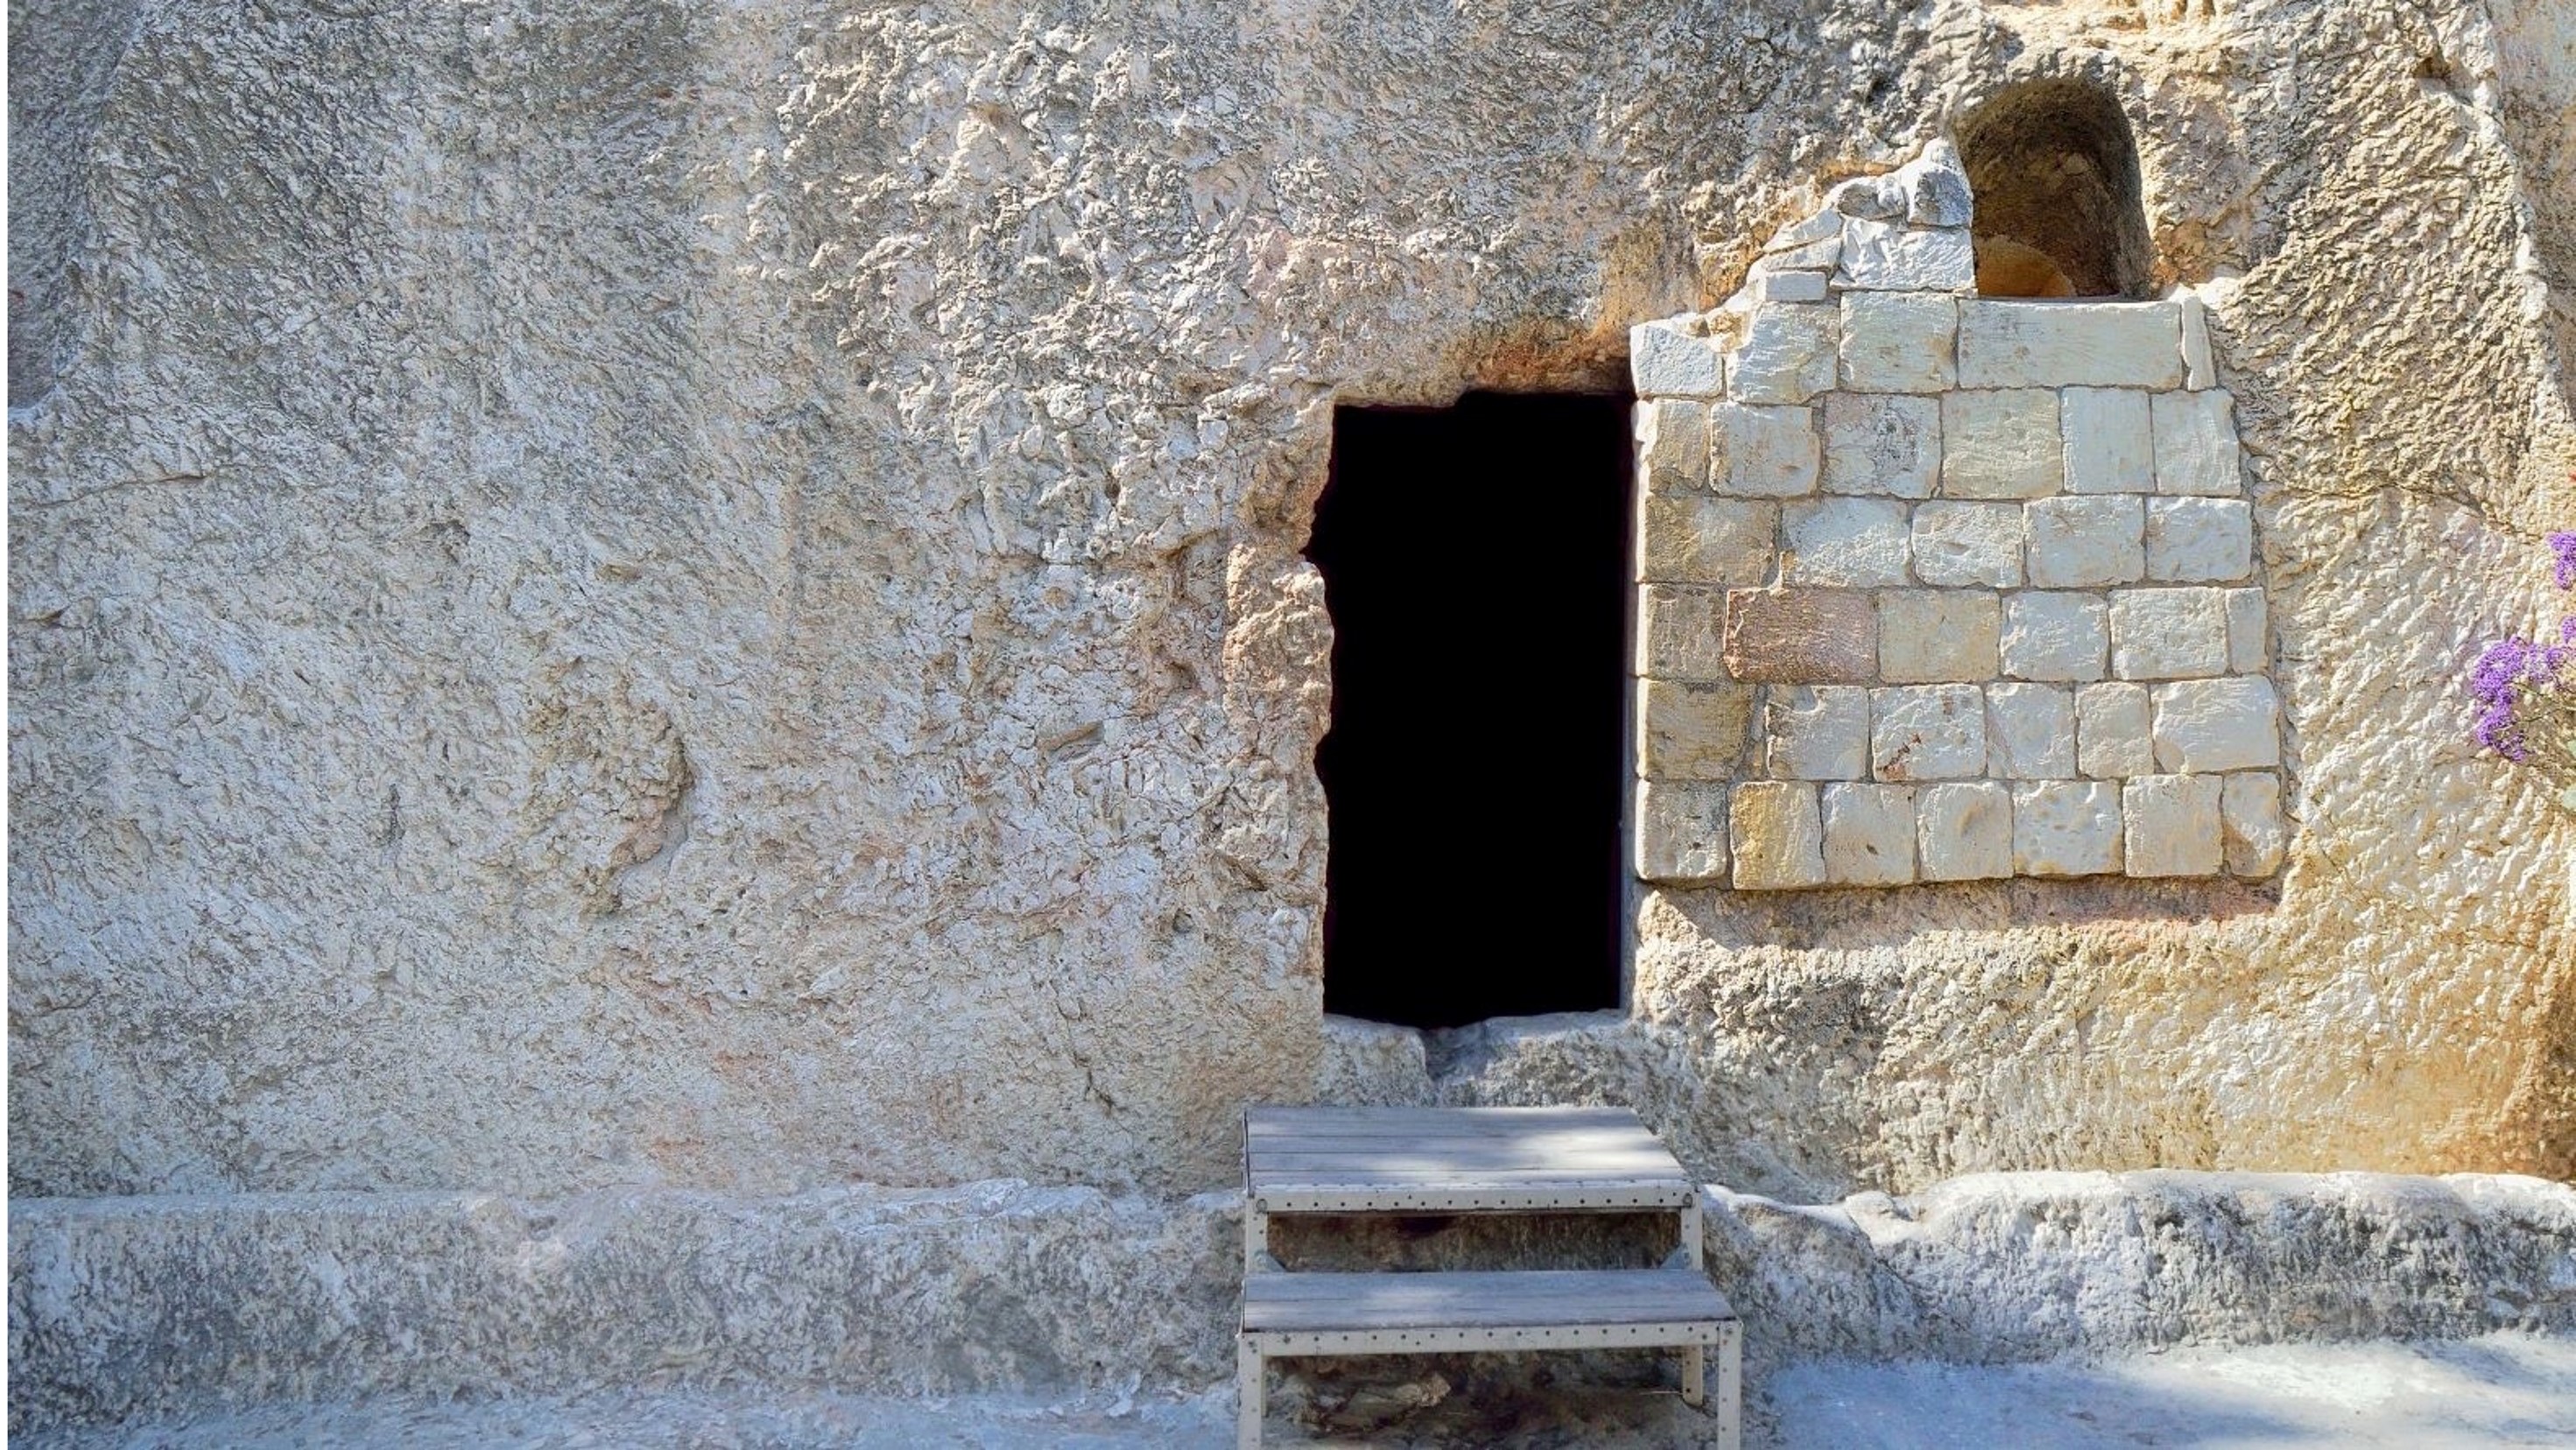 Jesus body is laid in the tomb